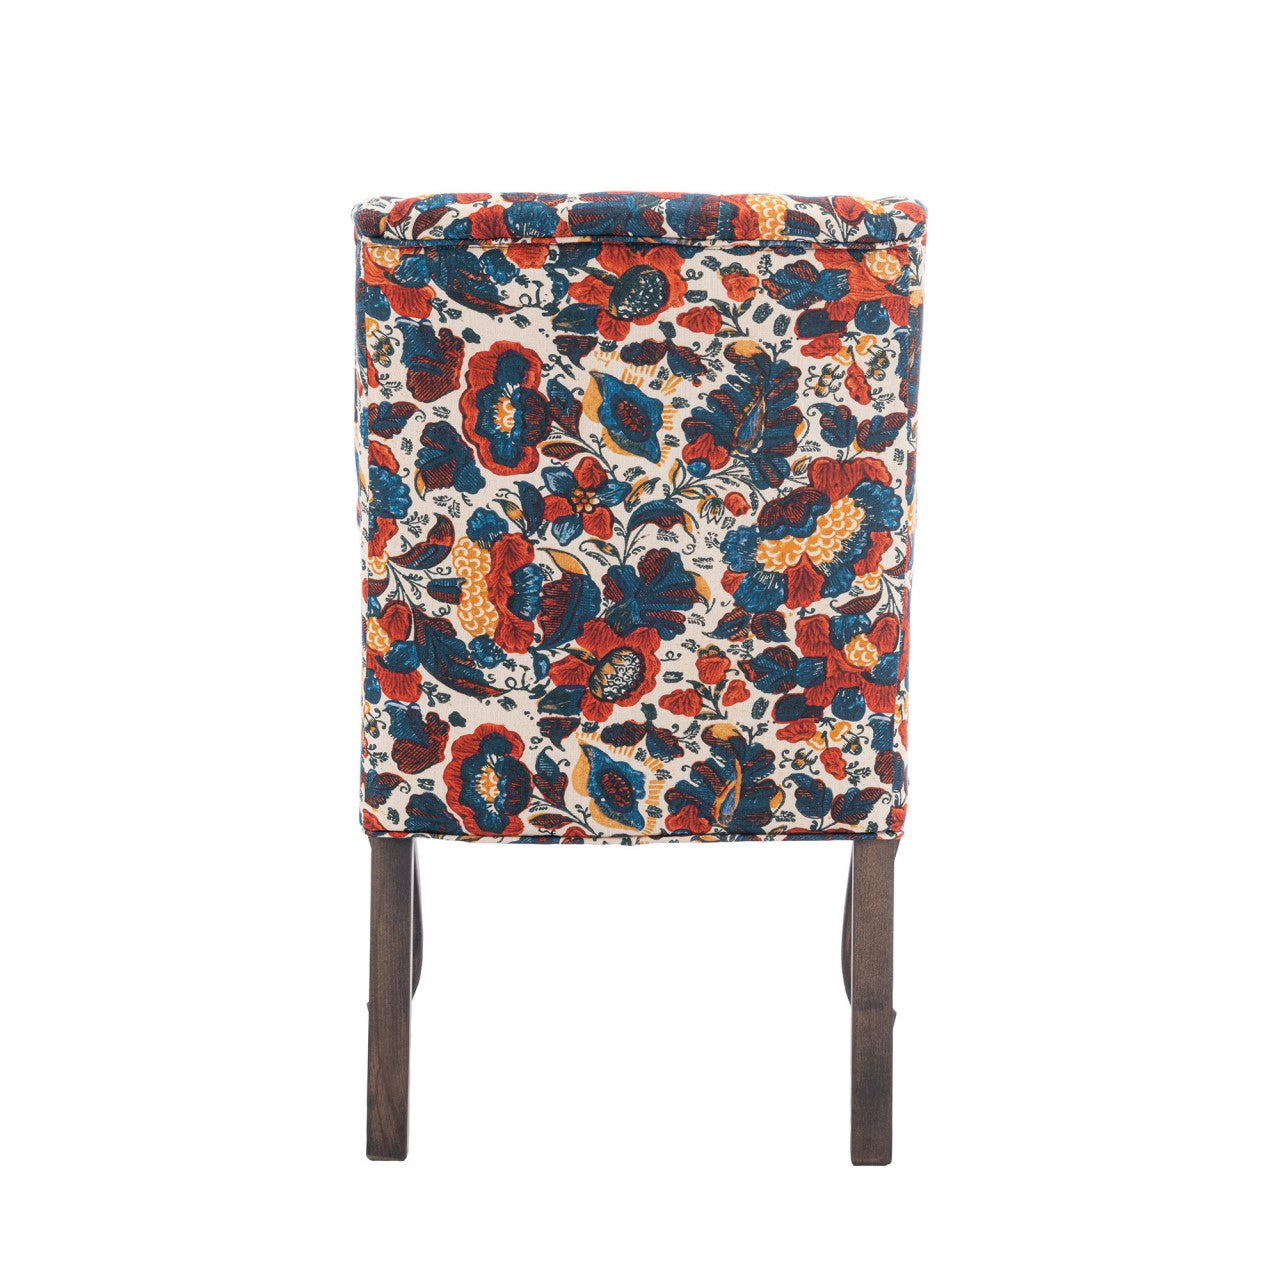 FITZROY TUFTED CHAIR - REMONDINI FLORAL Fabric_Furniture_Mindthegap